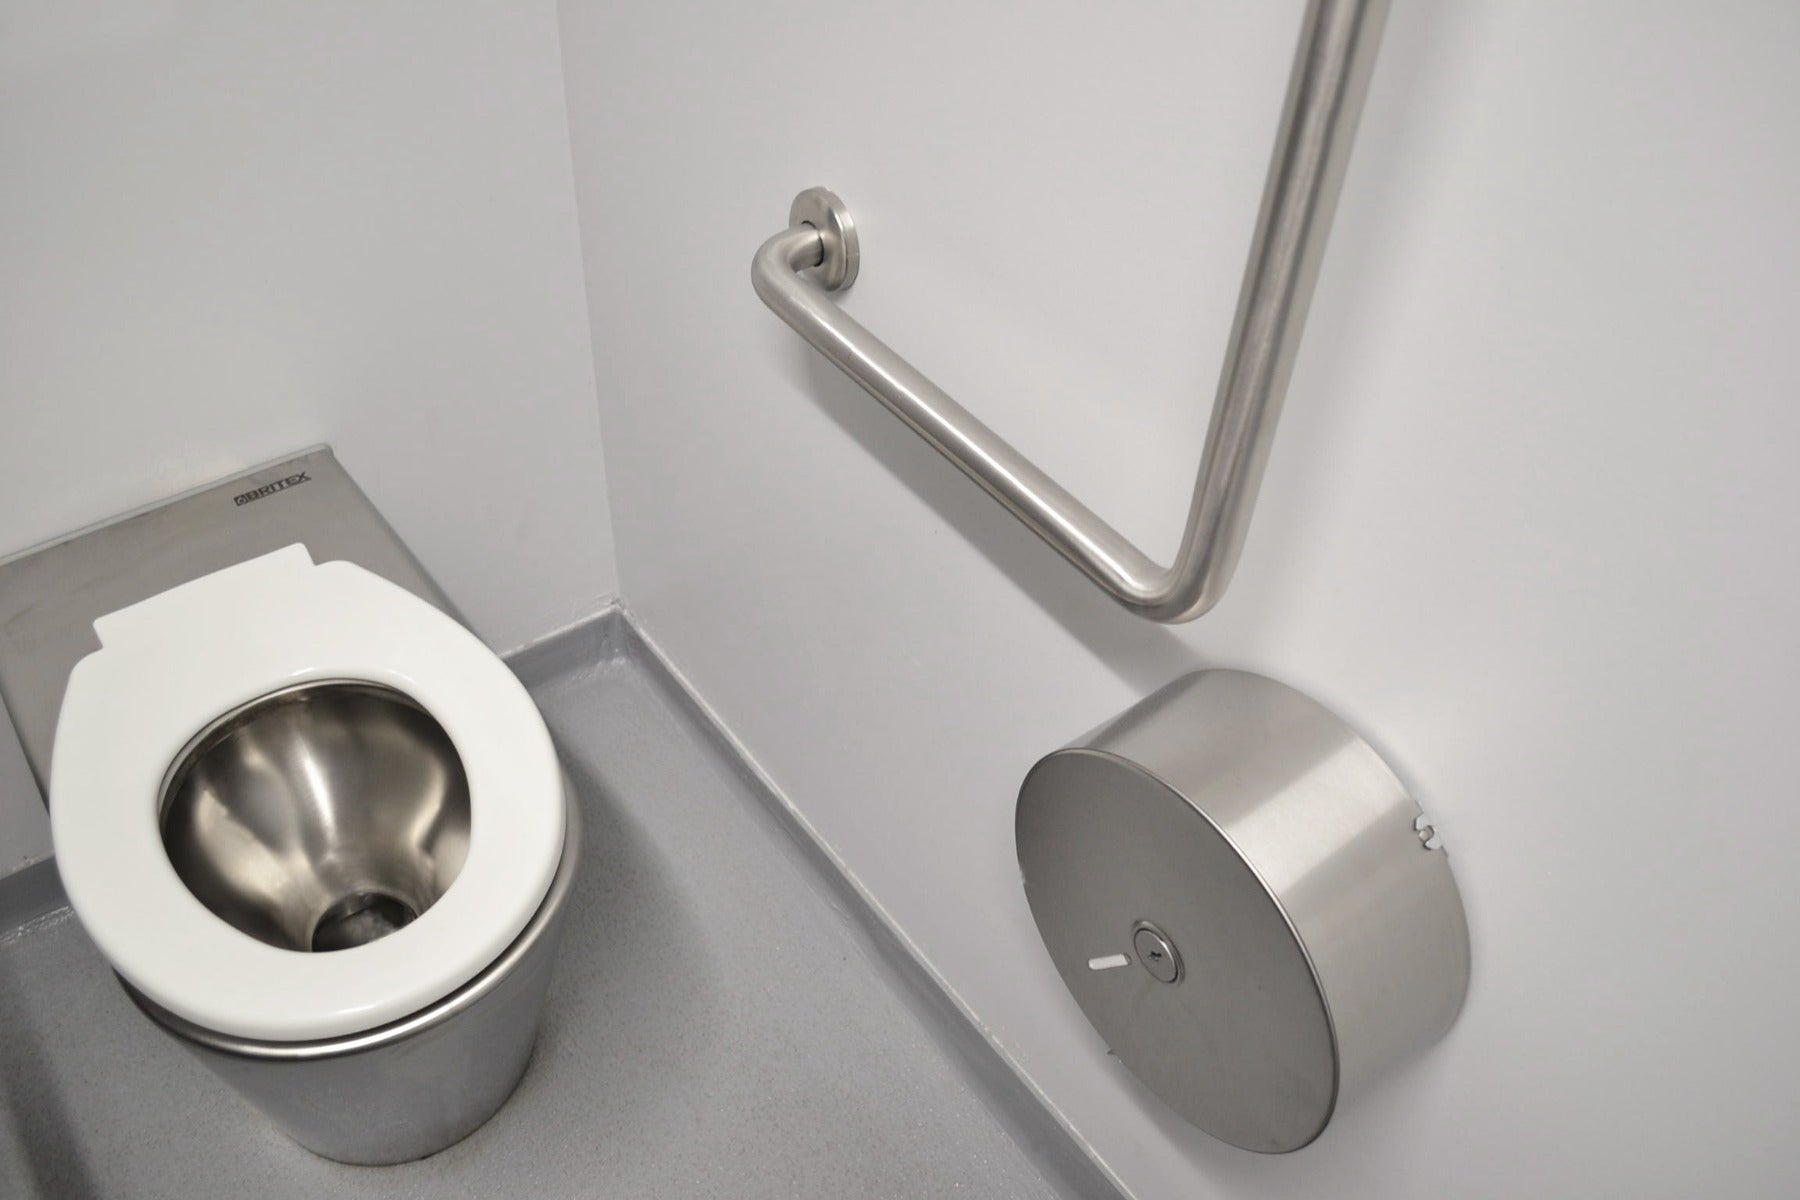 What is the difference between ambulant and accessible toilets